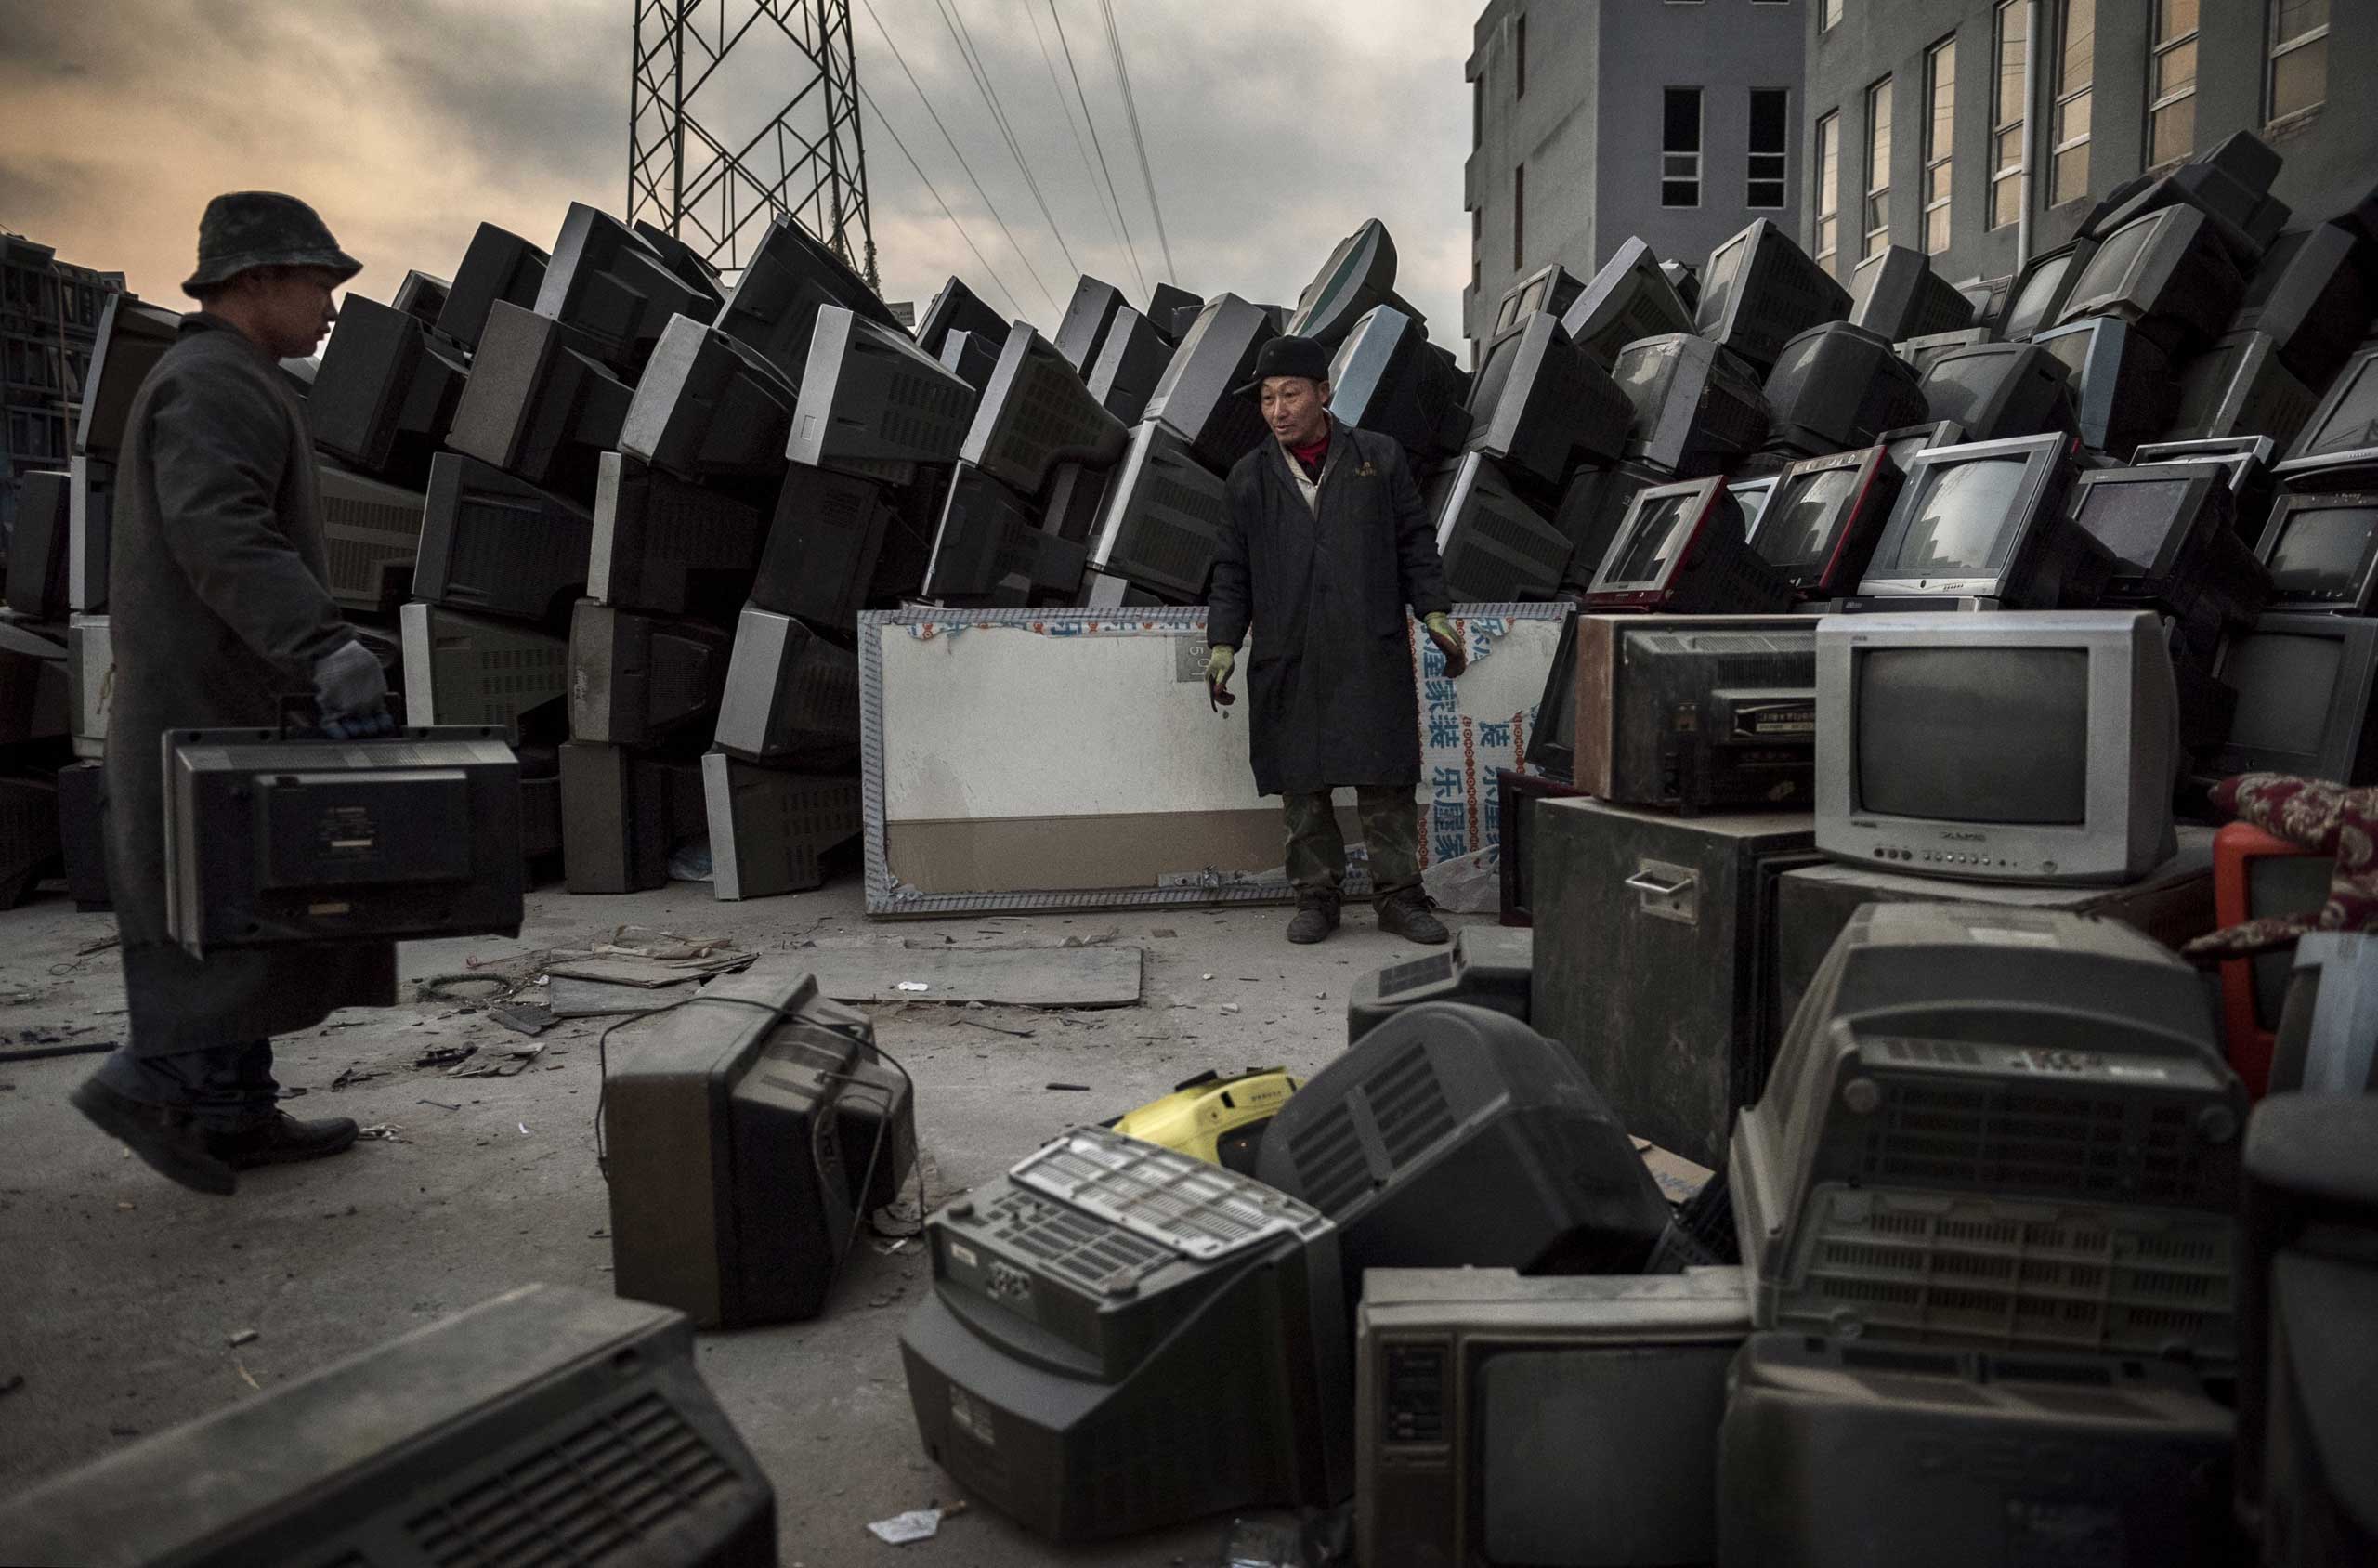 Laborers organize old televisions and computers to be recycled in the Dong Xiao Kou village on Dec. 11, 2014 in Beijing.